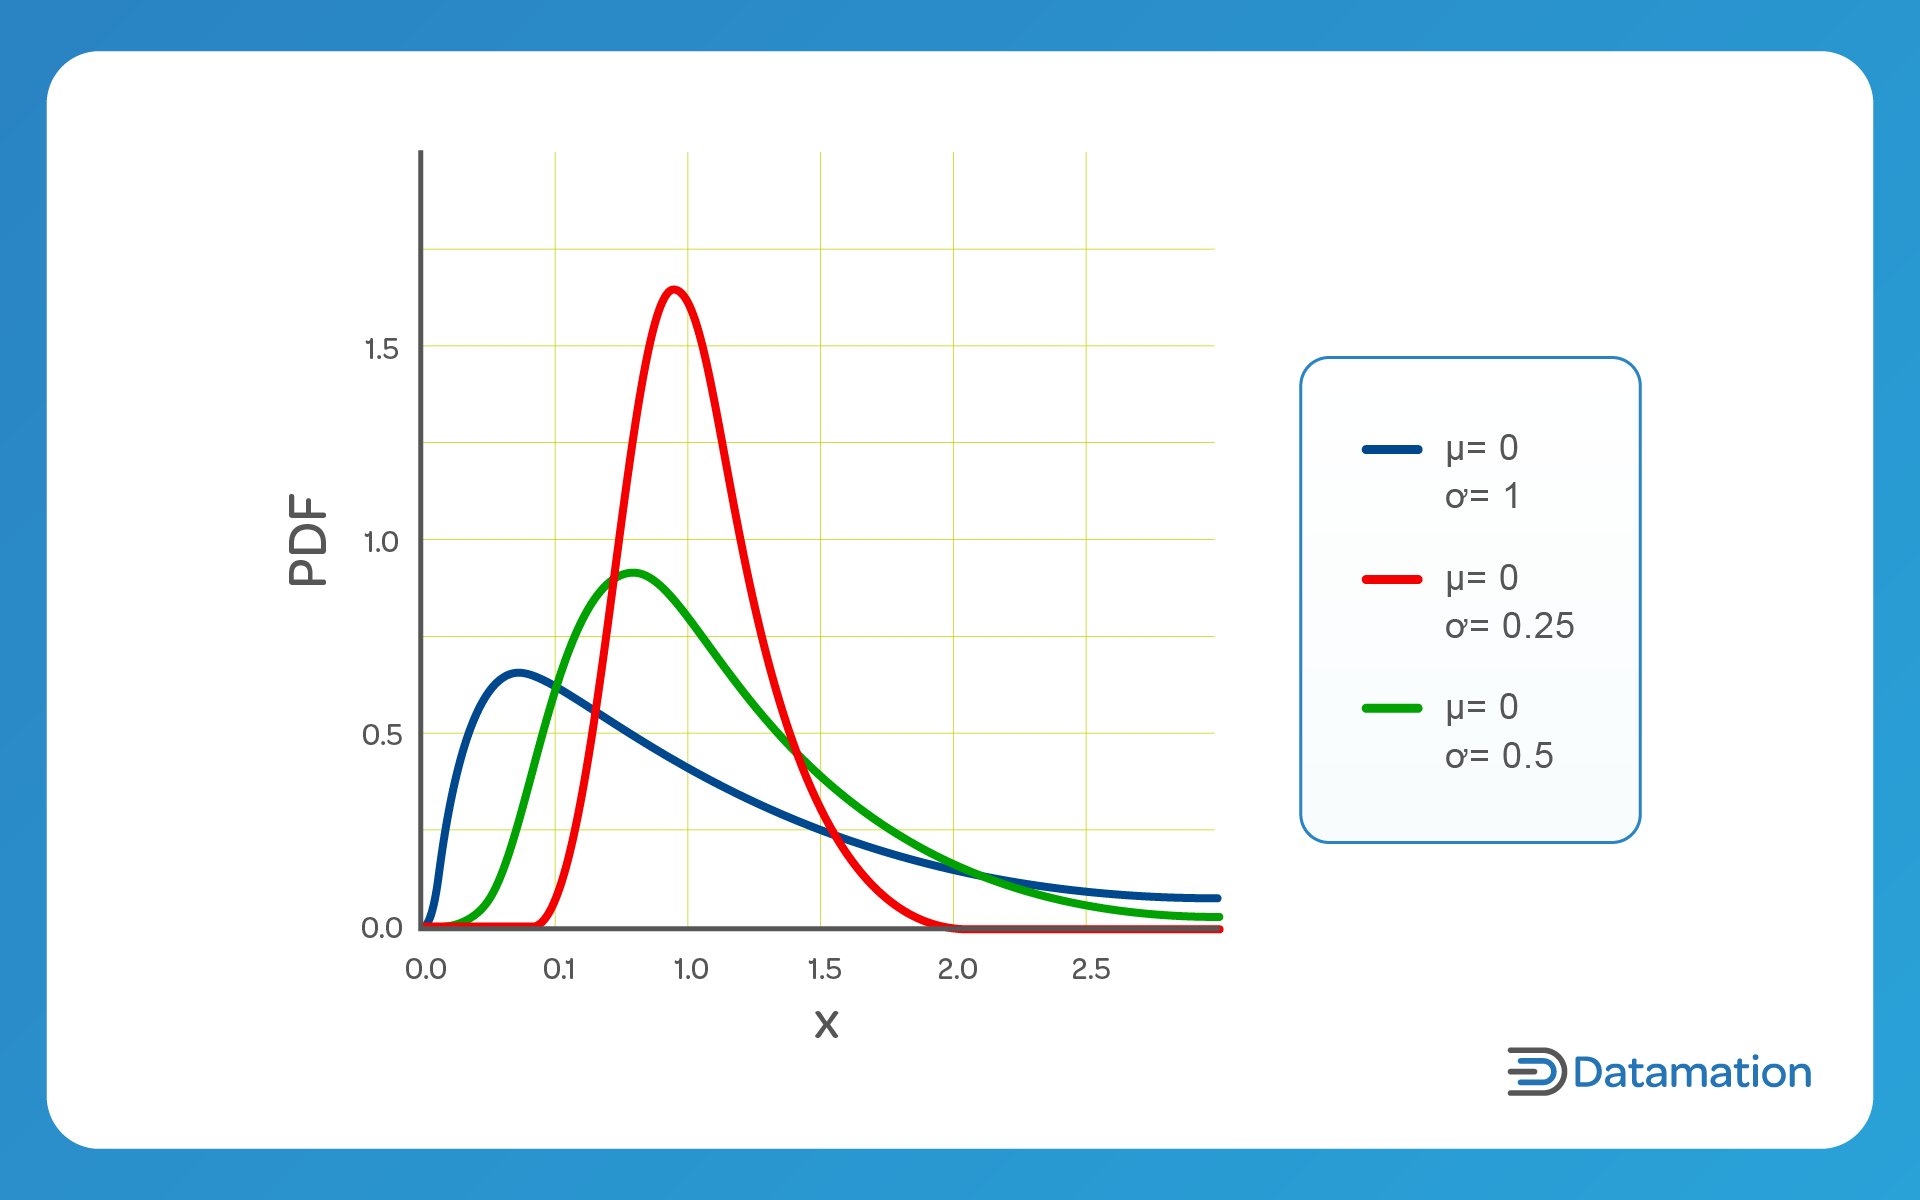 Log-normal distributions skew to the right and are ideal for modeling rate descriptions.